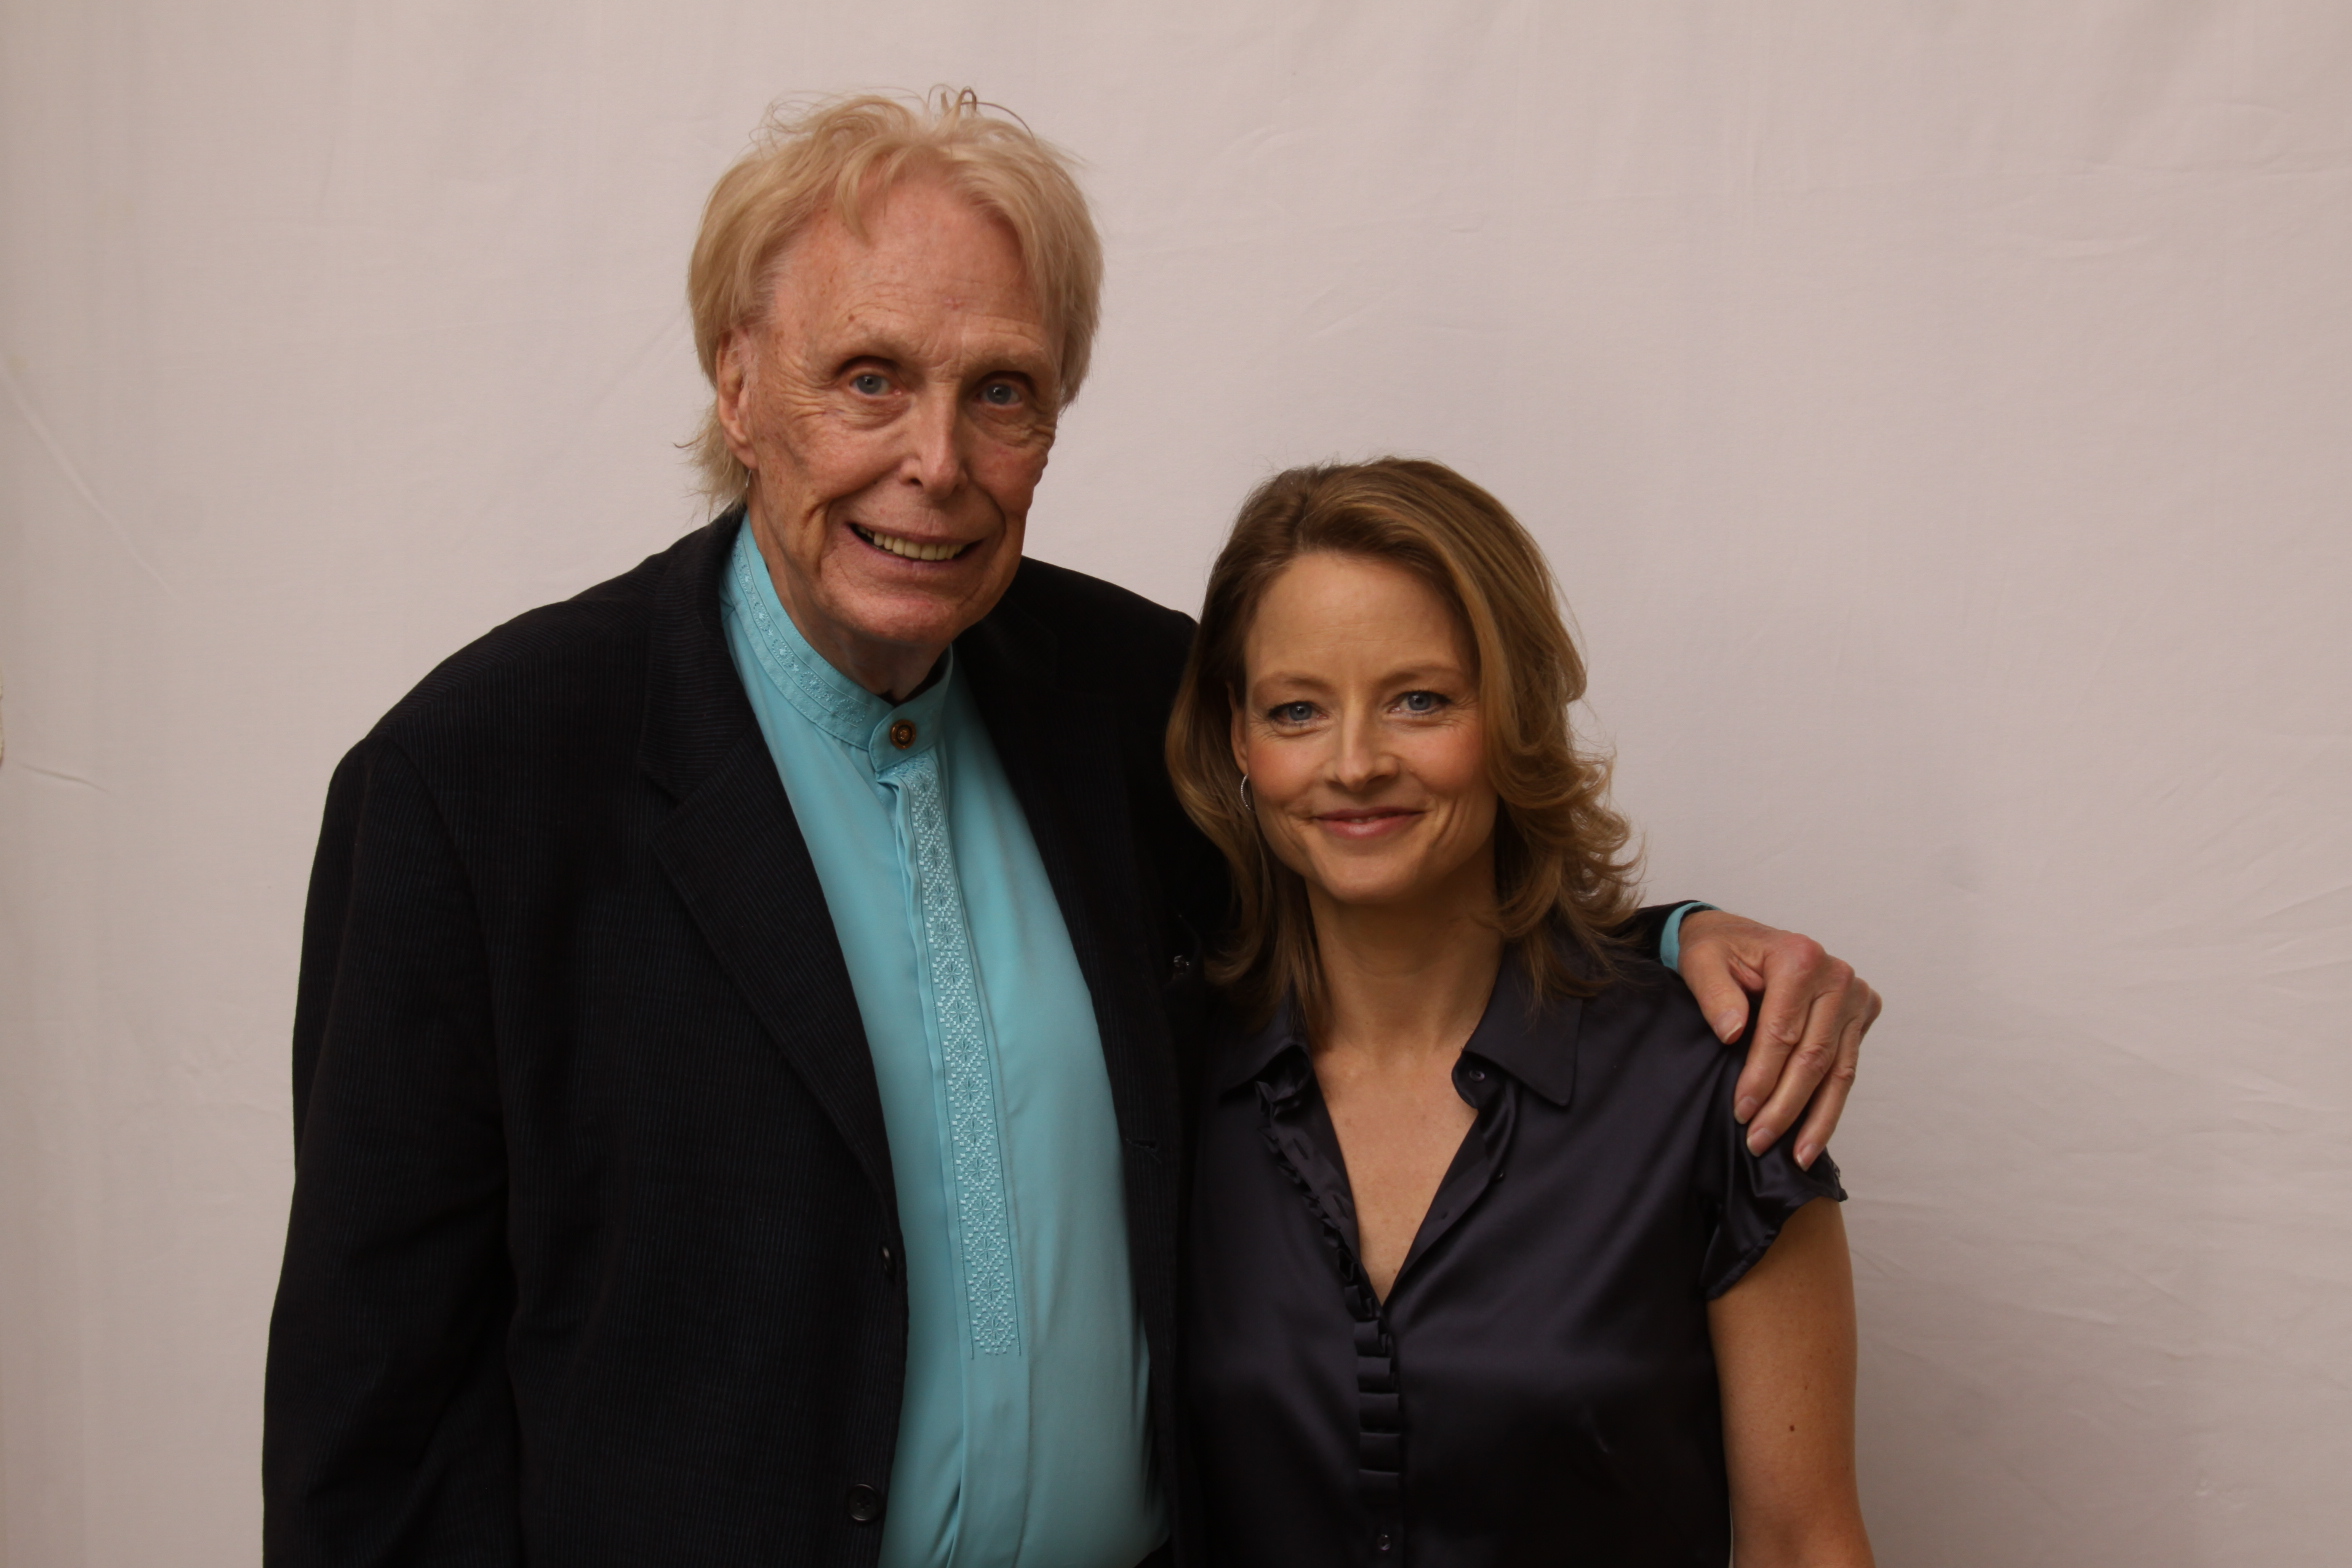 With Jodie Foster